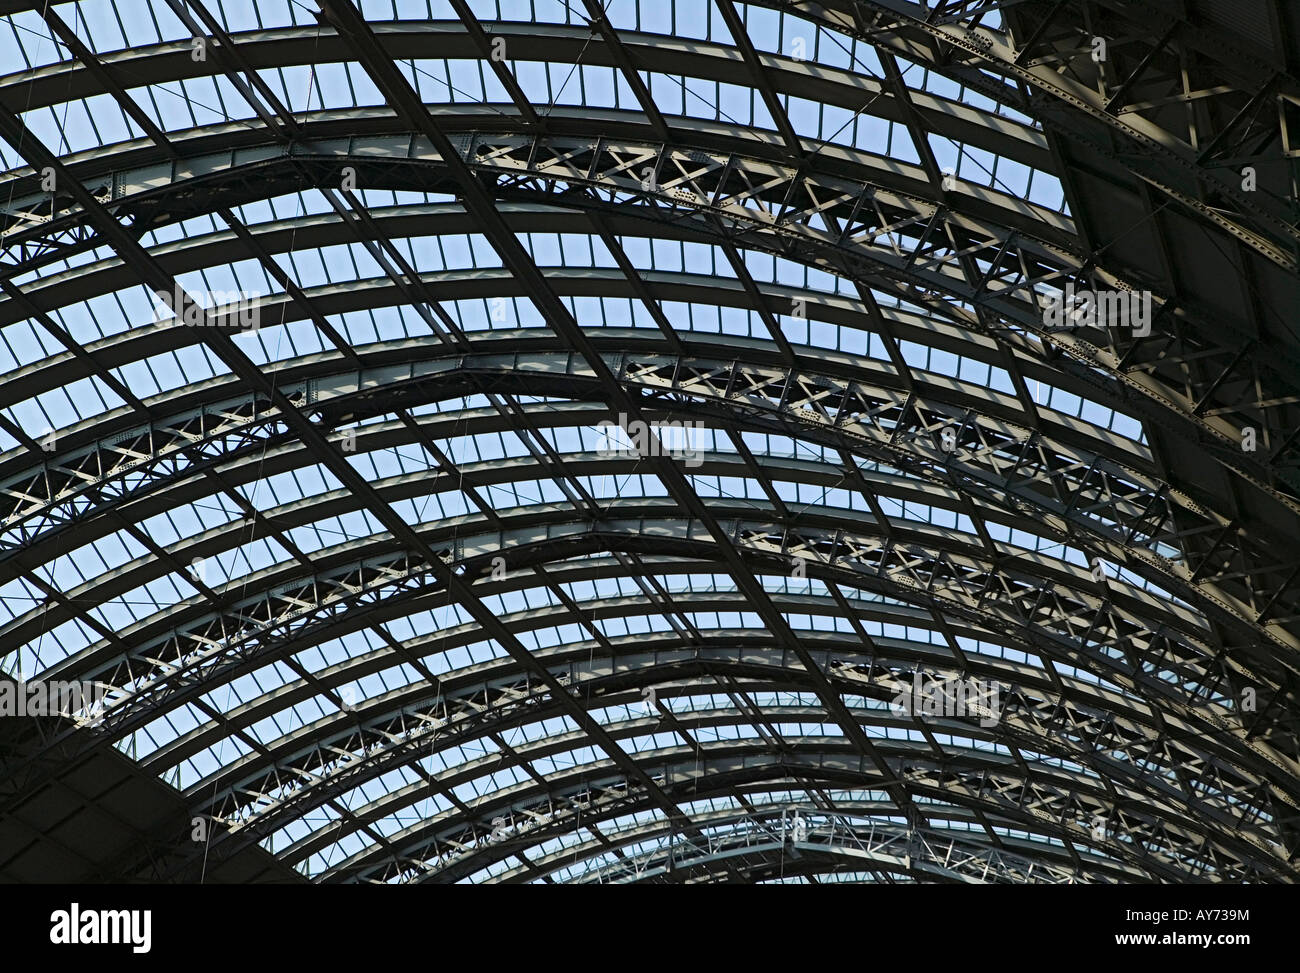 roof construction of railway station glass steel metal train transport sky urban architecture Europe Germany Stock Photo